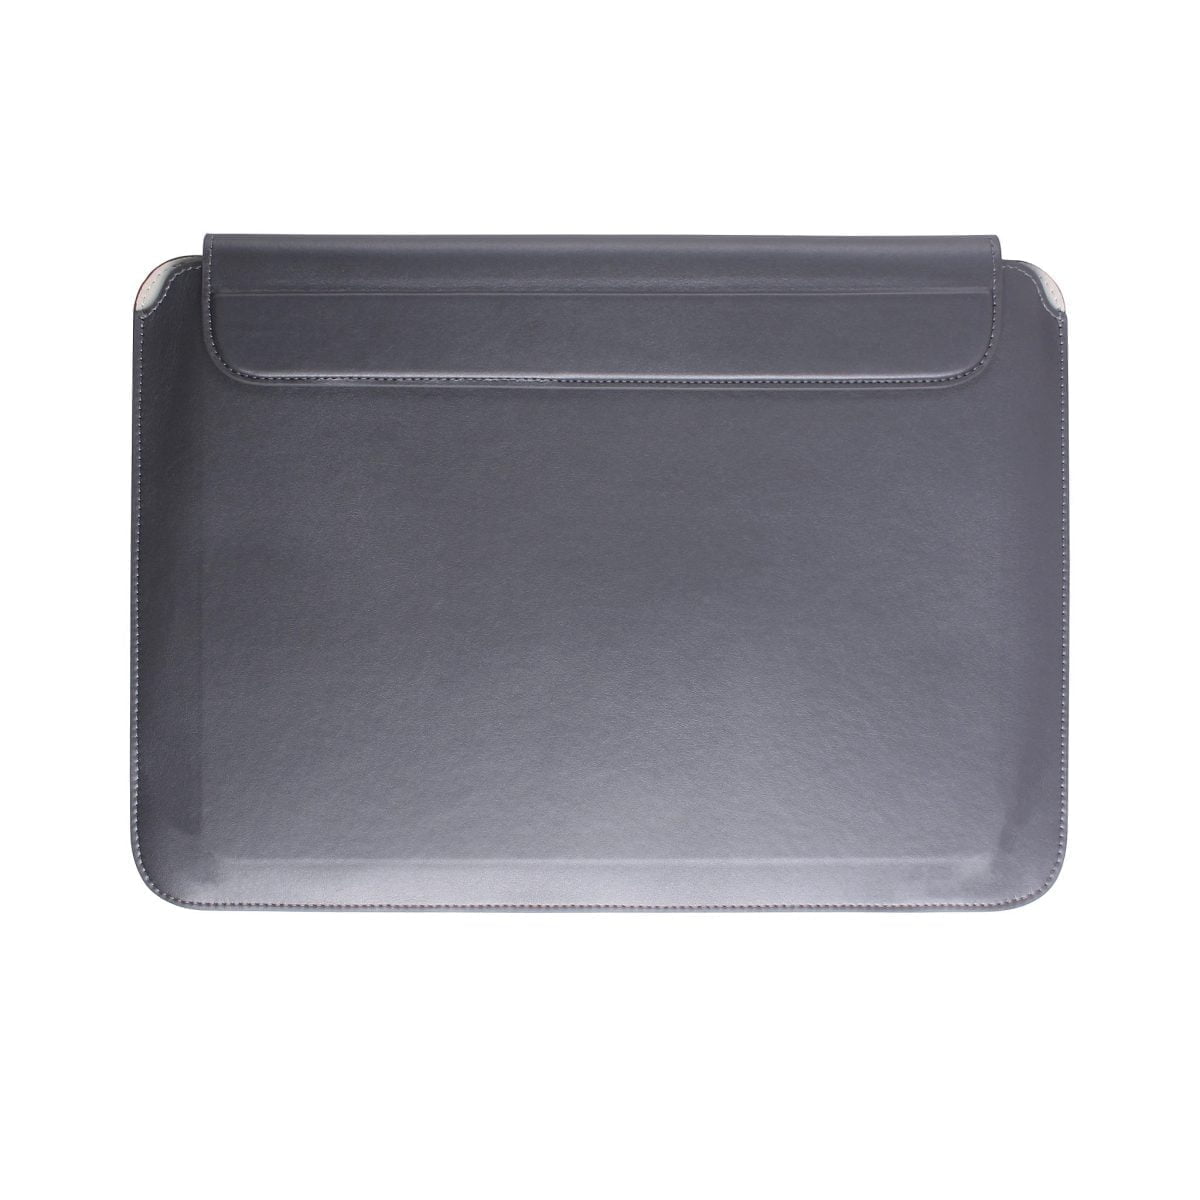 Jcp2393 Multifunction Sleeve Stand Gray &Amp;Lt;H1&Amp;Gt;Ergo Multifunction Sleeve Stand (Gray)&Amp;Lt;/H1&Amp;Gt; The Elegantly Compact Multifunction Sleeve Stand Is A Practical Carry Accessory That Allows You To Use Your Laptop In A More Ergonomic Position When You’re On The Go And Minimize Neck Strain. Featuring A Built-In Stand That Props Up Your Laptop To A 15° Or 30° Position, Magnetic Closures And Made From A Durable Pu Material, The Multifunction Sleeve Stand Is Versatile Travel Accessory. &Amp;Lt;Ul&Amp;Gt; &Amp;Lt;Li&Amp;Gt;Ergonomic Riser Stand Holds Laptop At 15° Or 30°&Amp;Lt;/Li&Amp;Gt; &Amp;Lt;Li&Amp;Gt;Magnetic Closure/Stand For Quick And Easy Setup&Amp;Lt;/Li&Amp;Gt; &Amp;Lt;Li&Amp;Gt;Increases Cooling Airflow Around Laptop&Amp;Lt;/Li&Amp;Gt; &Amp;Lt;Li&Amp;Gt;Durable 3Mm Pu Material&Amp;Lt;/Li&Amp;Gt; &Amp;Lt;/Ul&Amp;Gt; Ergo Multifunction Sleeve Stand (Gray) - Jcp2393